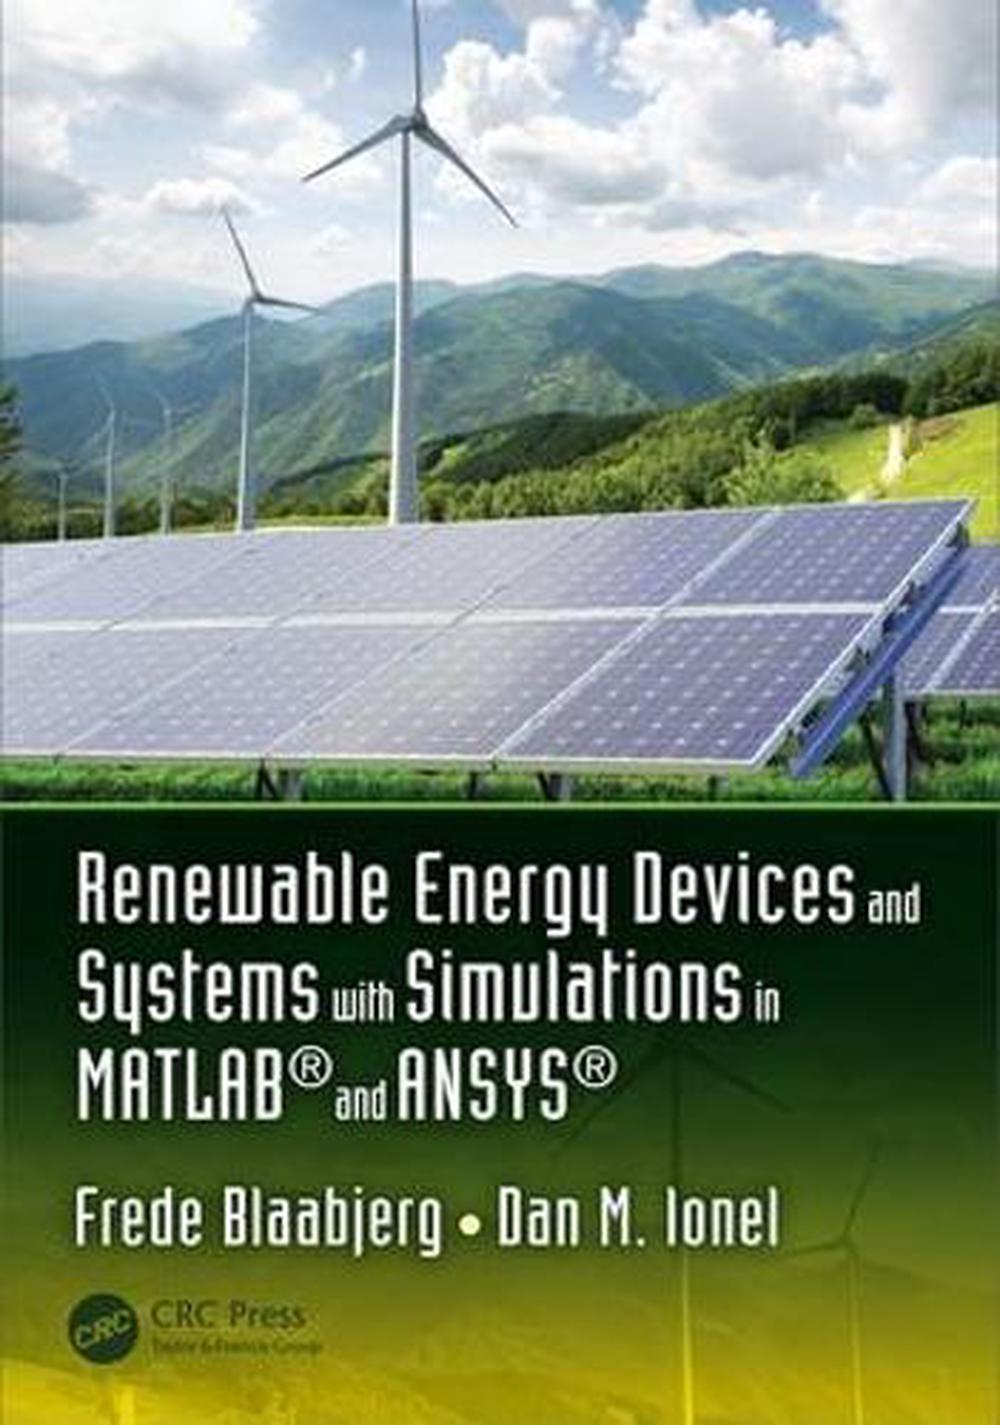 Renewable Energy Devices and Systems with Simulations in MATLAB (R) and